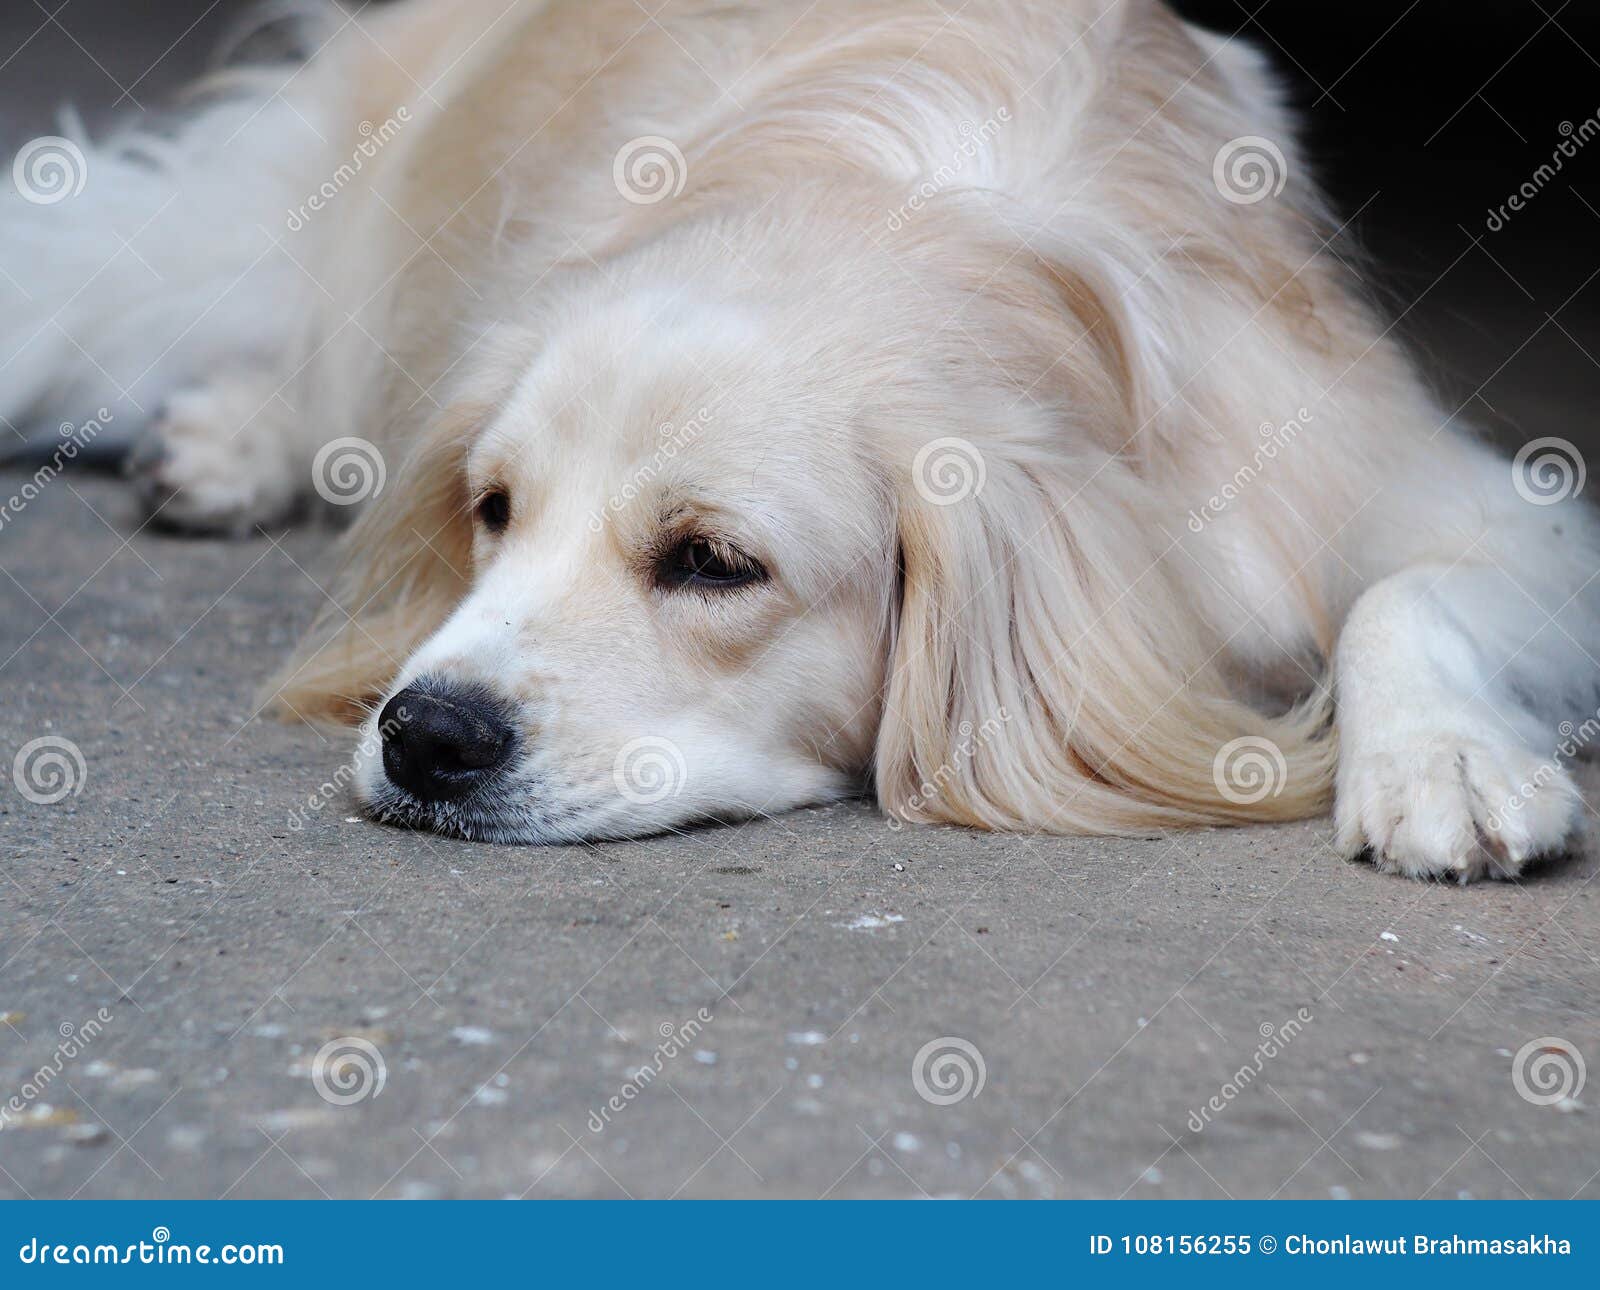 Cute Lovely White Long Hair Young Crossbreed Dog Stock Image